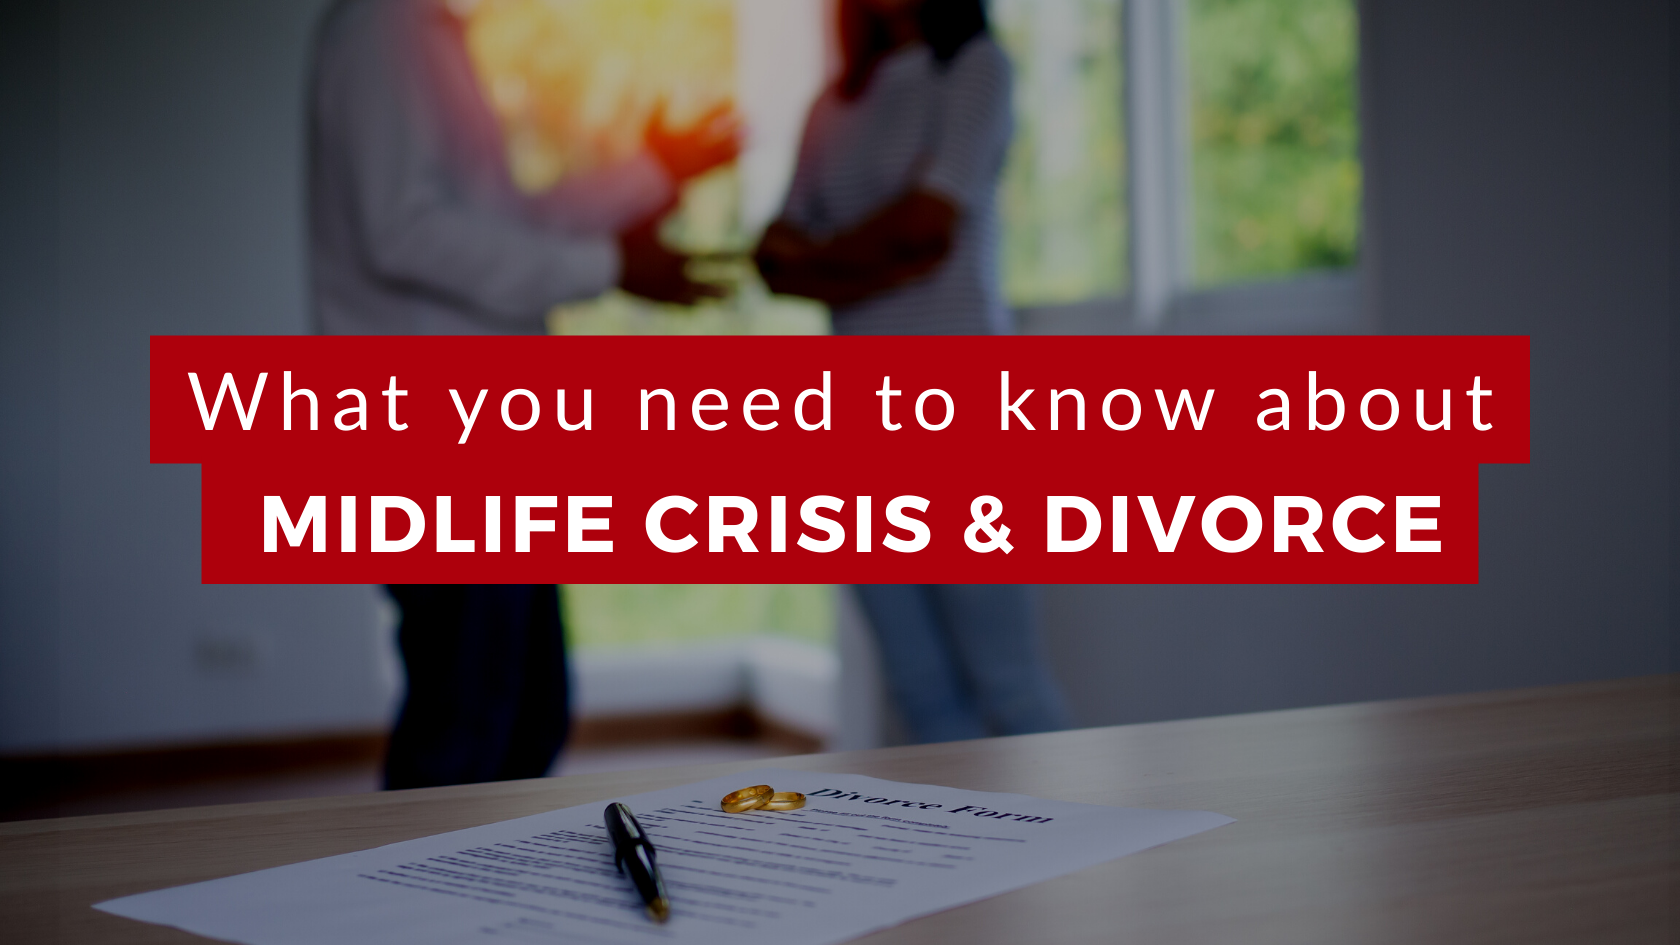 Midlife crisis and divorce